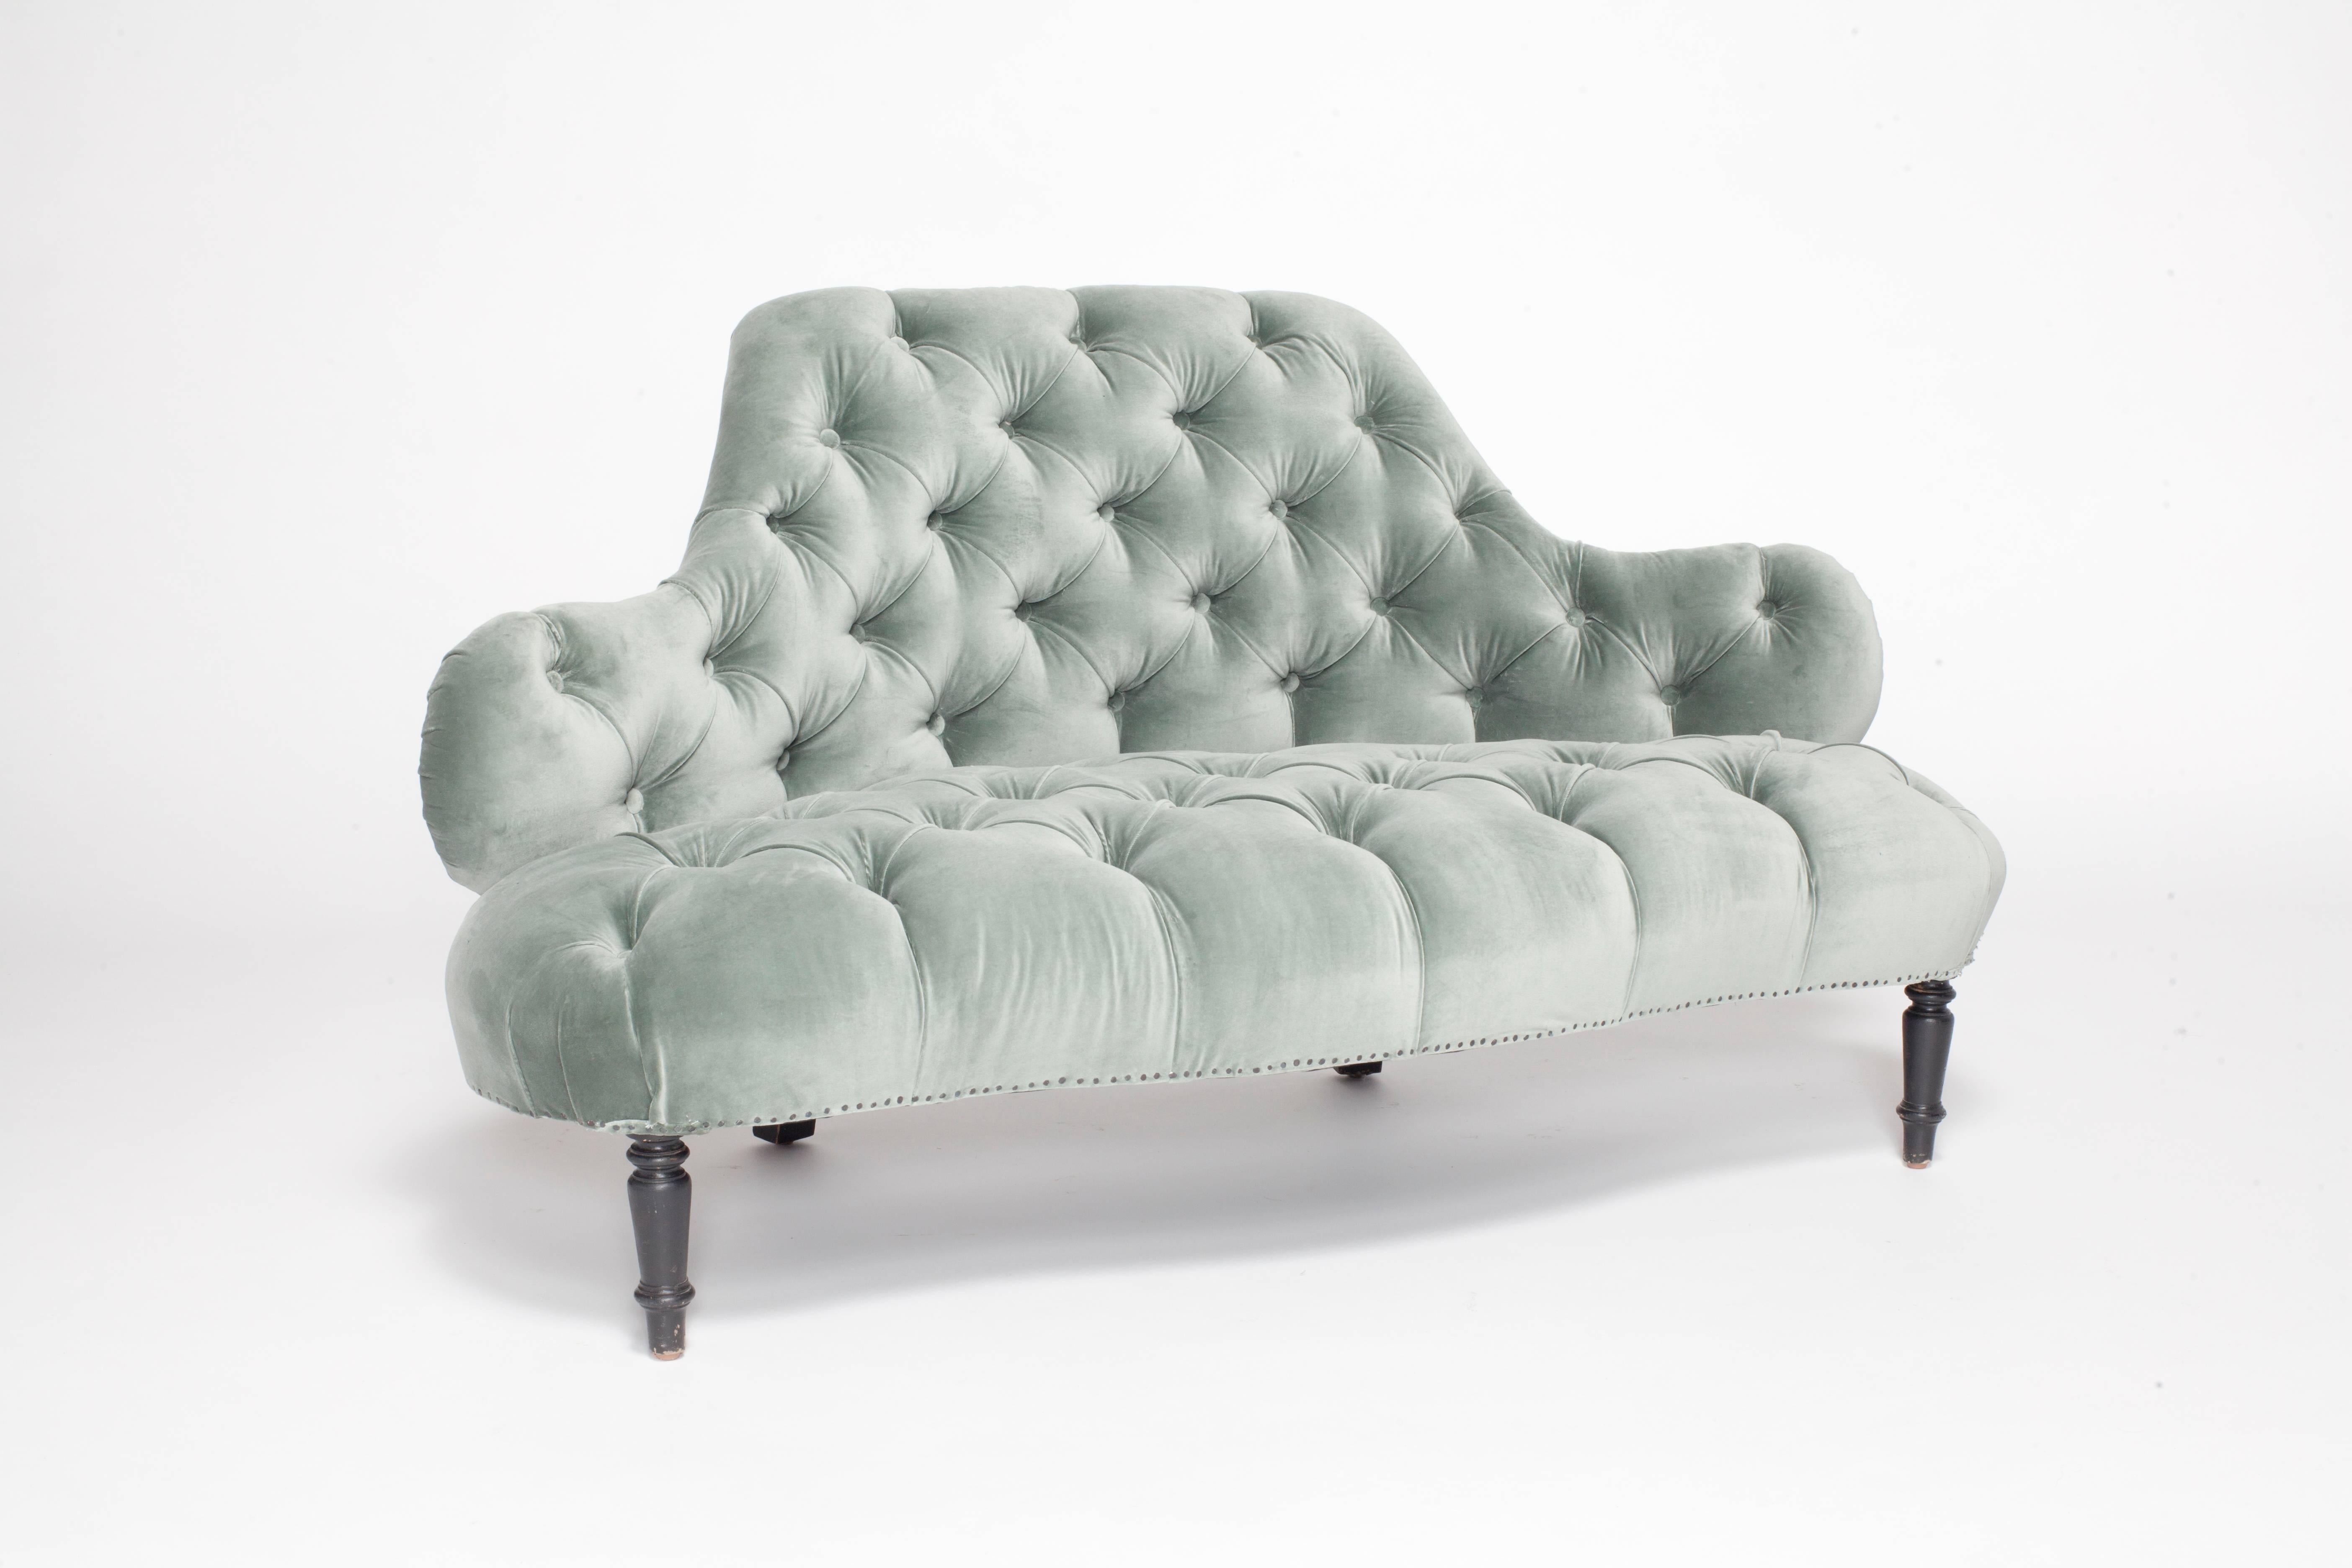 Mid-20th Century French Petite Tufted Settee Newly Upholstered in Beautiful Blue Grey Velvet